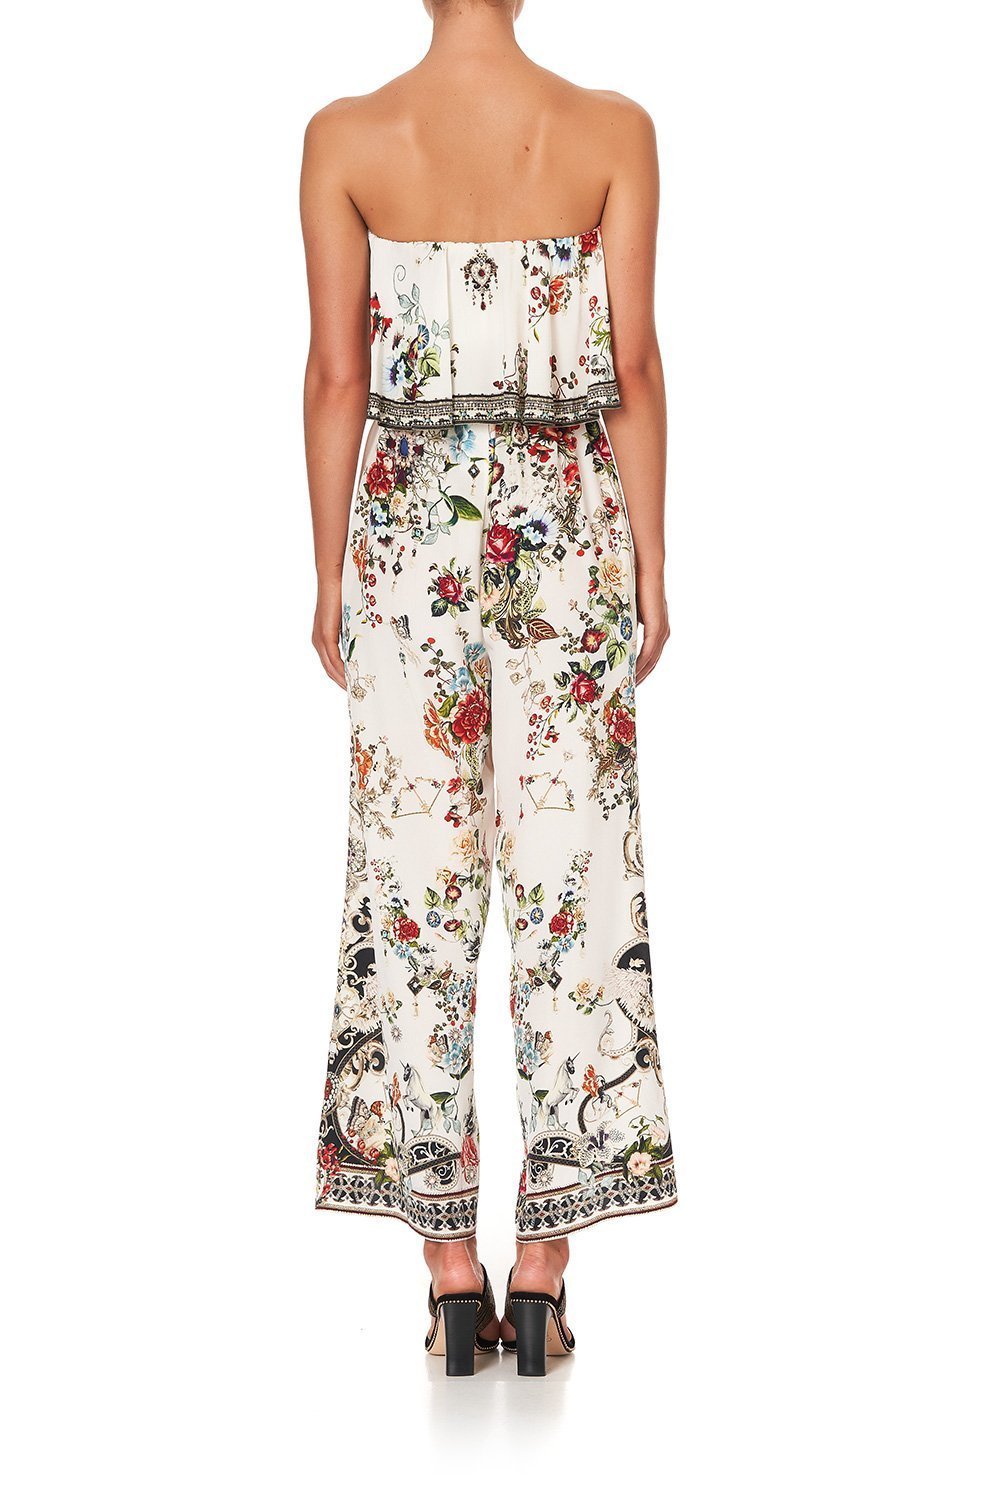 STRAPLESS JUMPSUIT WITH FRILL SHAKESPEARES GARDEN